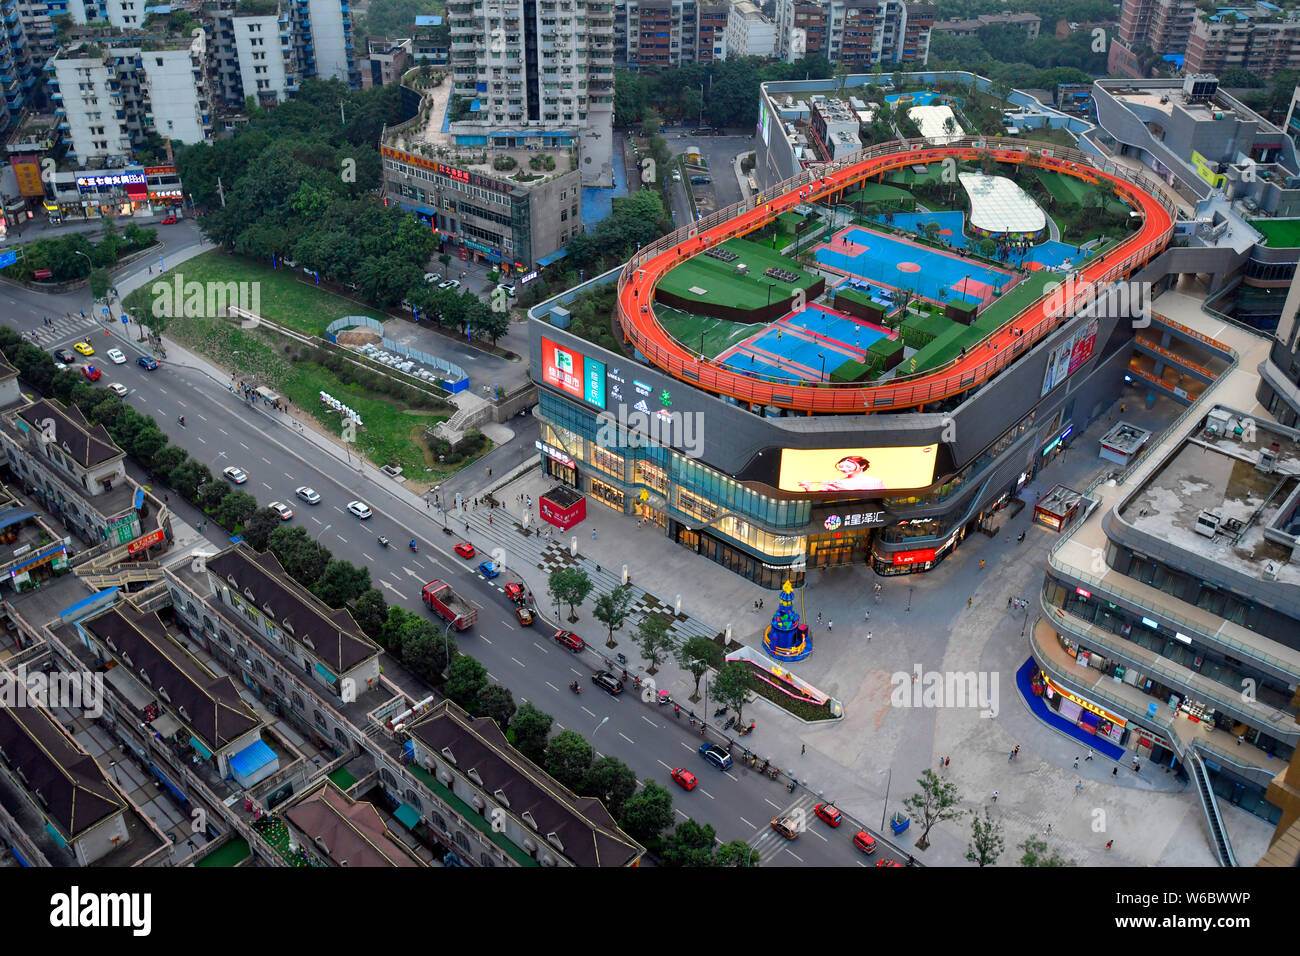 Aerial view of a stadium on the rooftop of a shopping mall in Chongqing, China, 22 May 2018.   A stadium on the roof of a shopping mall was pictured i Stock Photo